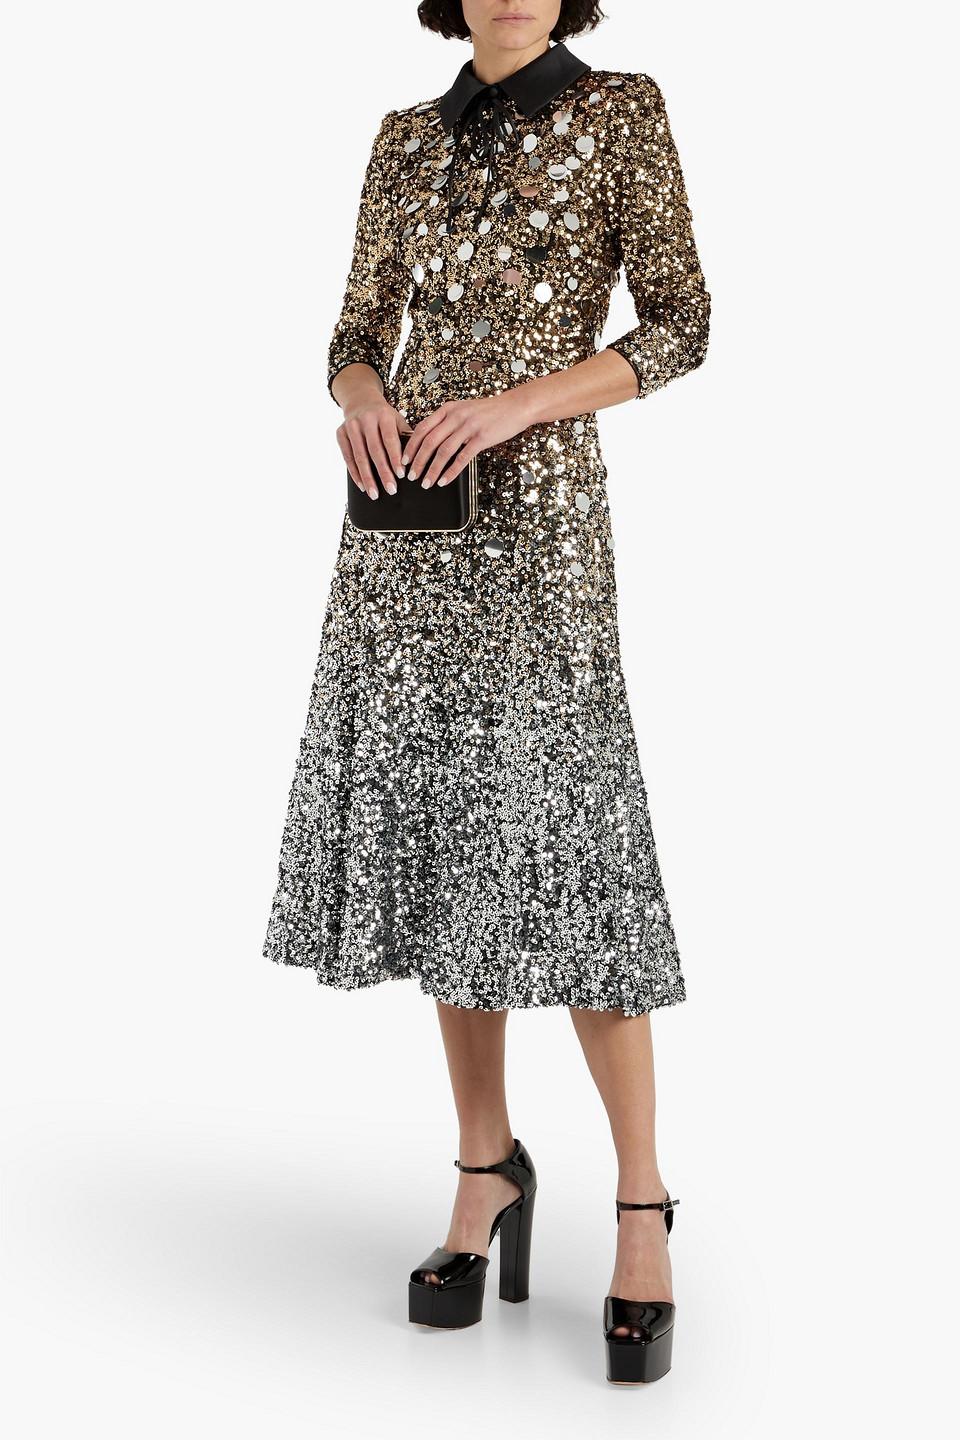 Sequin Gown with Back Cowl Neck by Badgley Mishcka